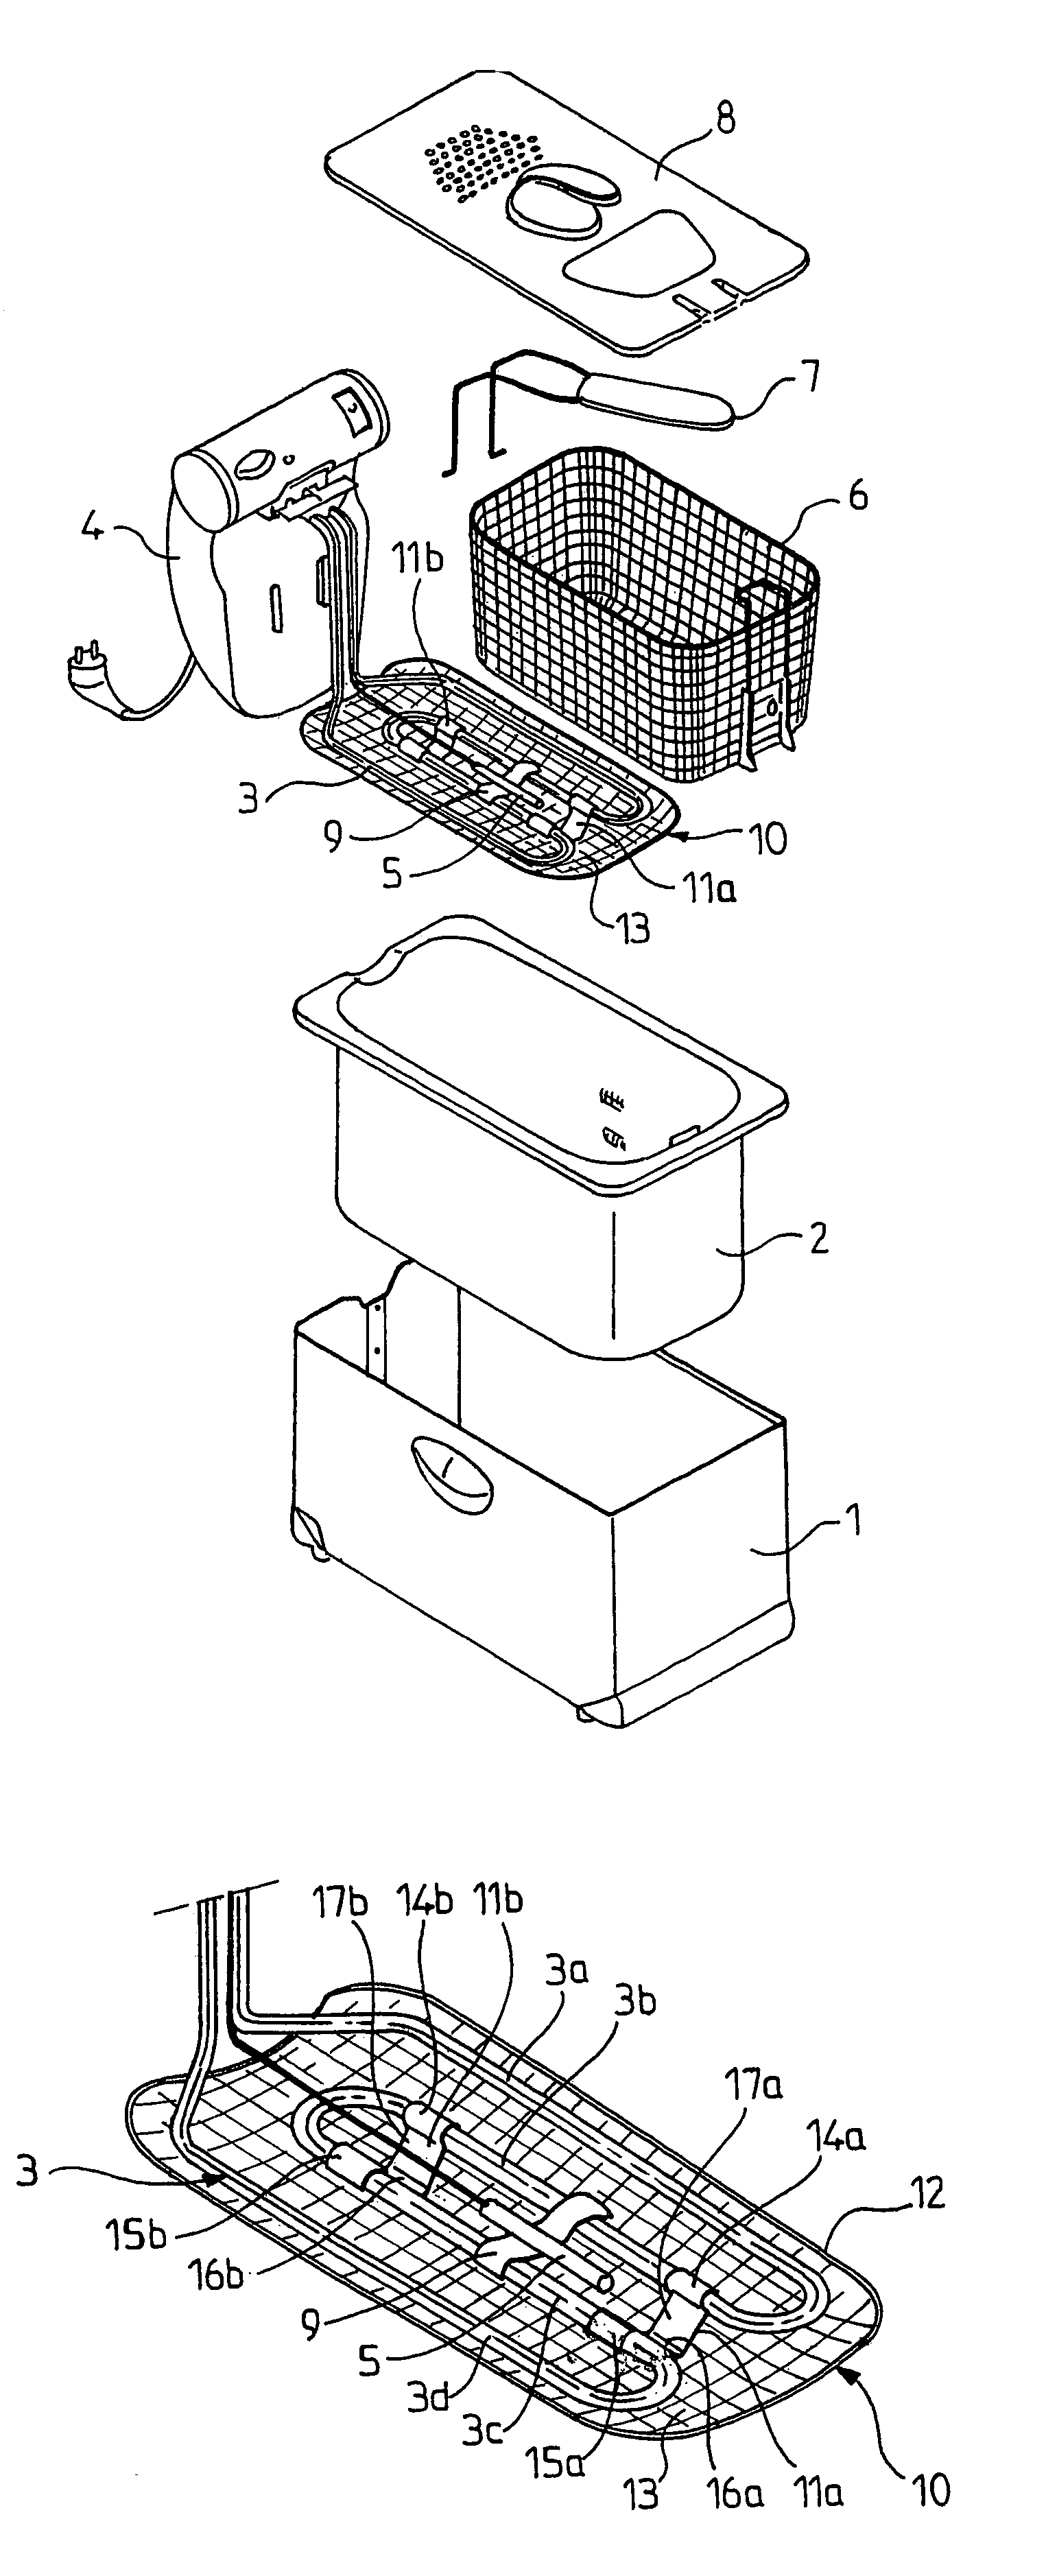 Device for filtration of the frying bath in an electric fryer having an immersed heating resistor